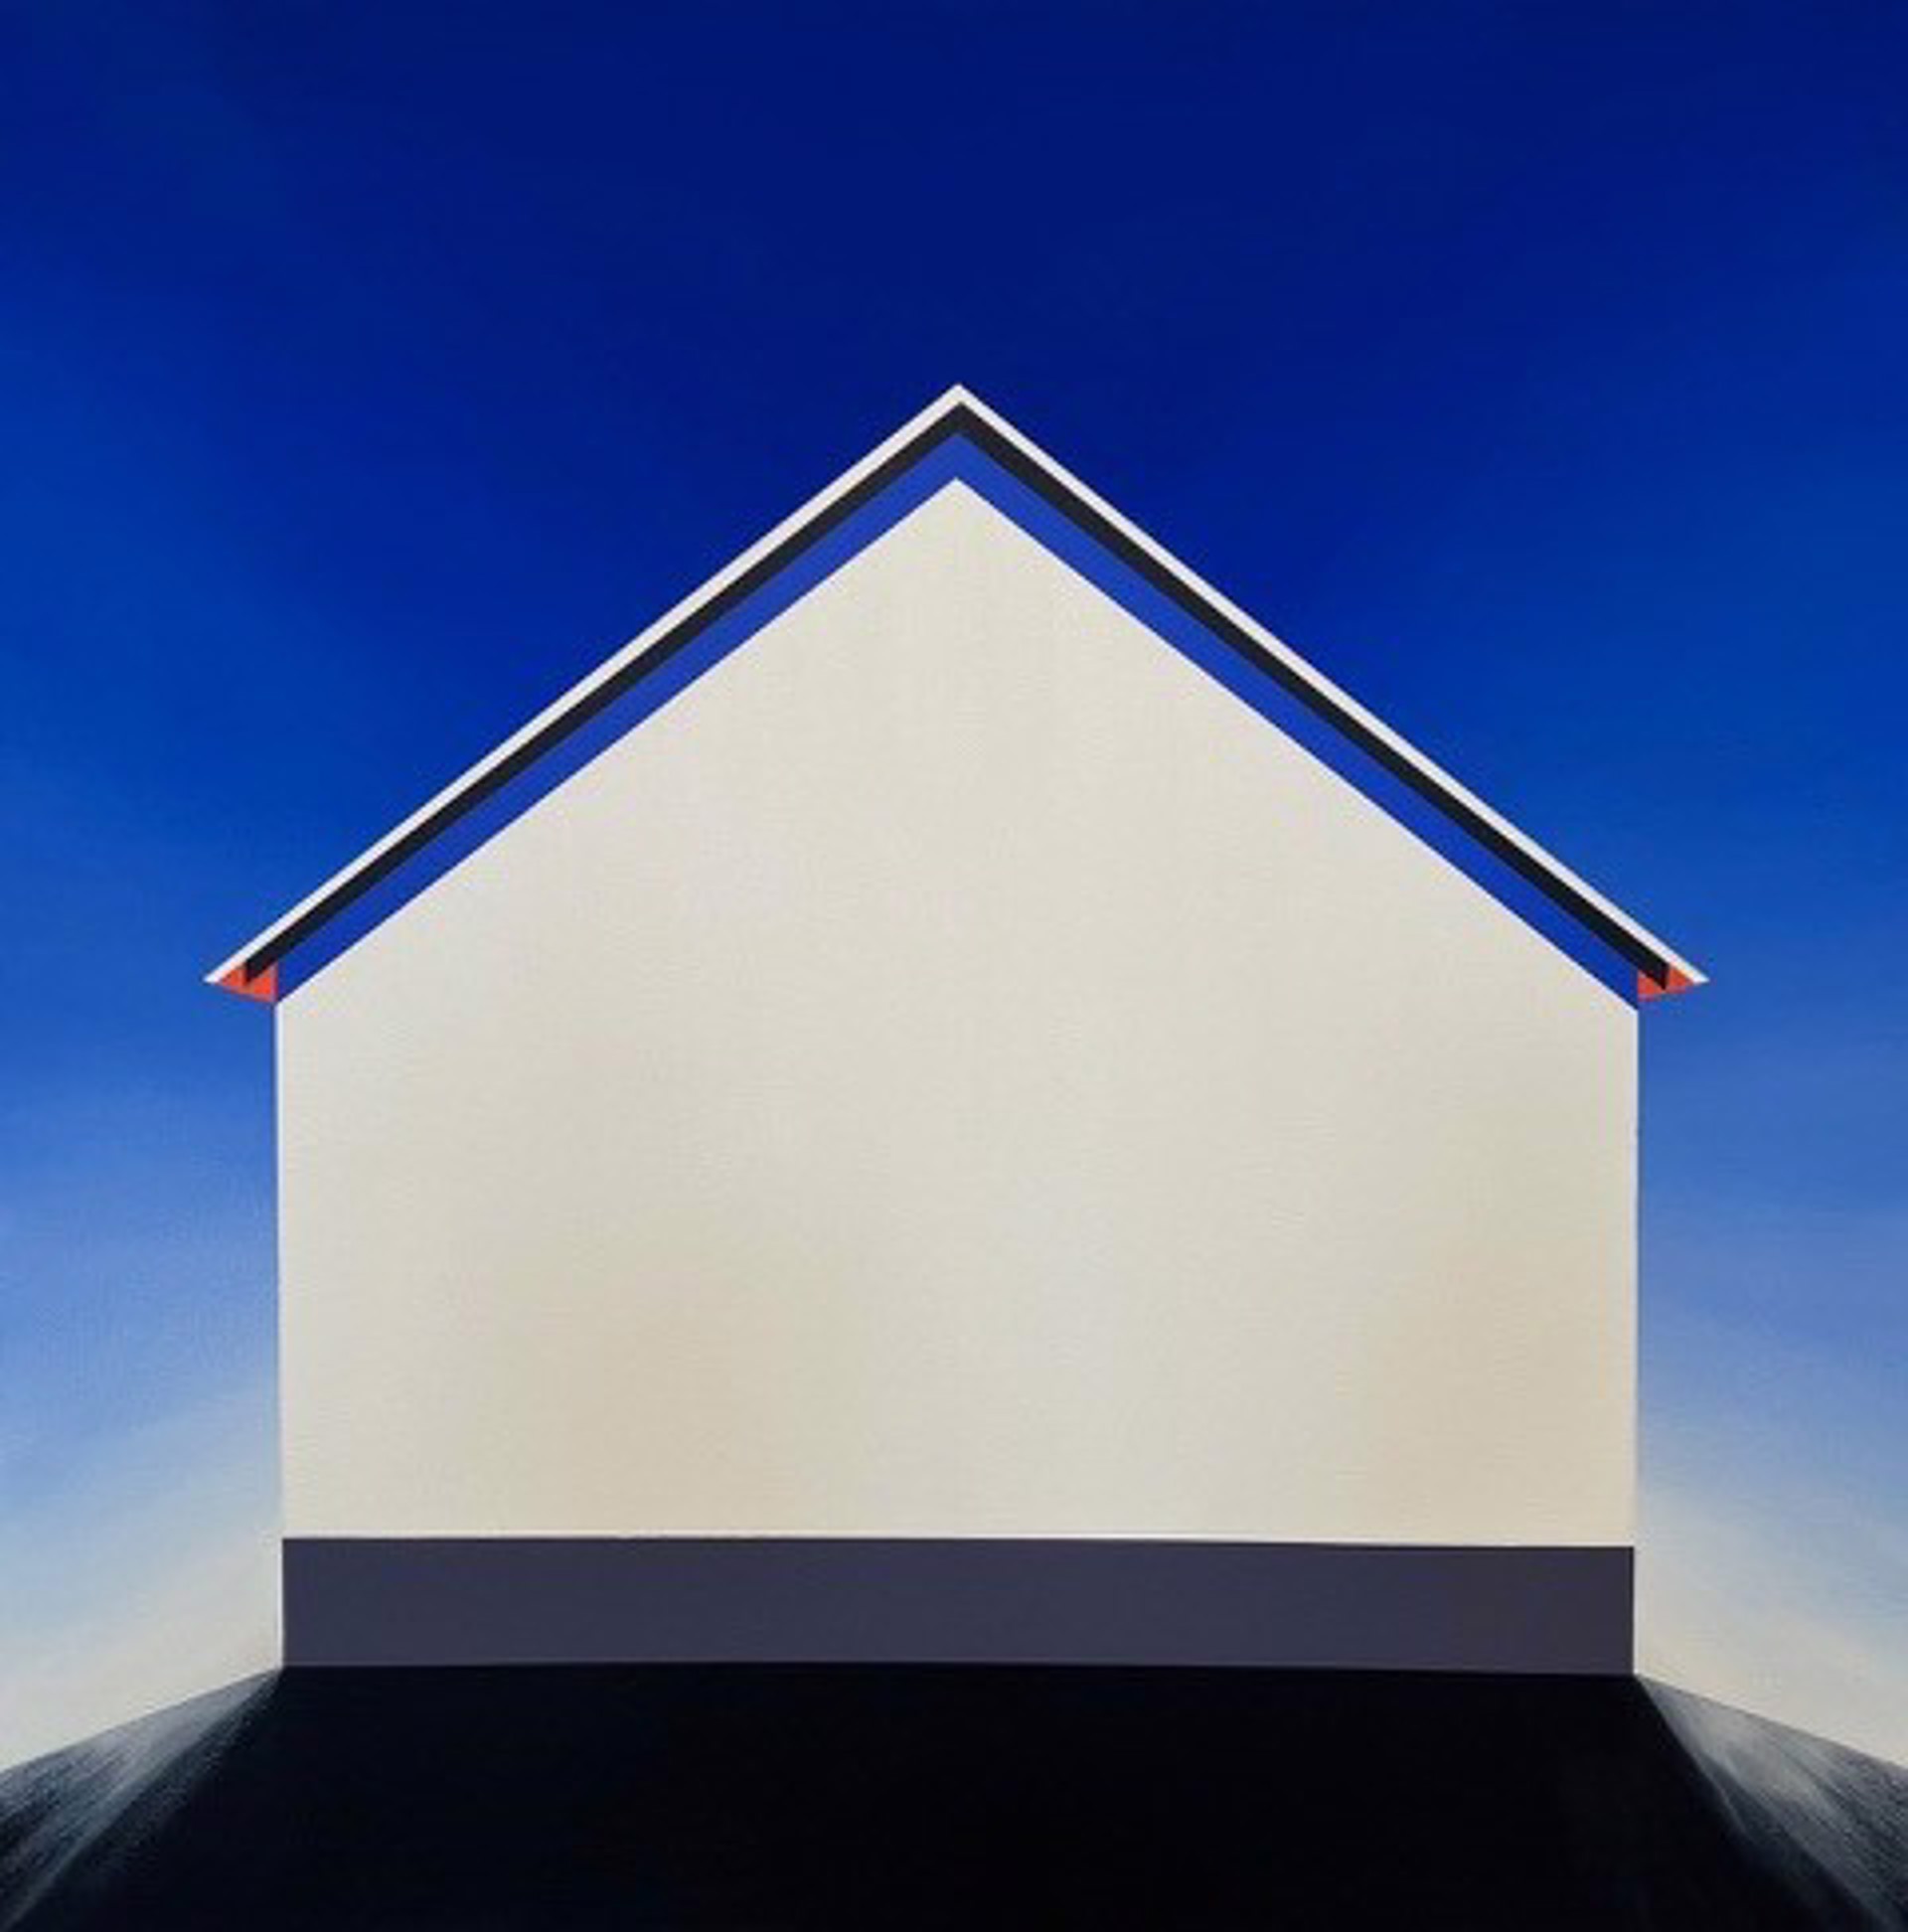 White Barn, Blue Sky by Louis Copt